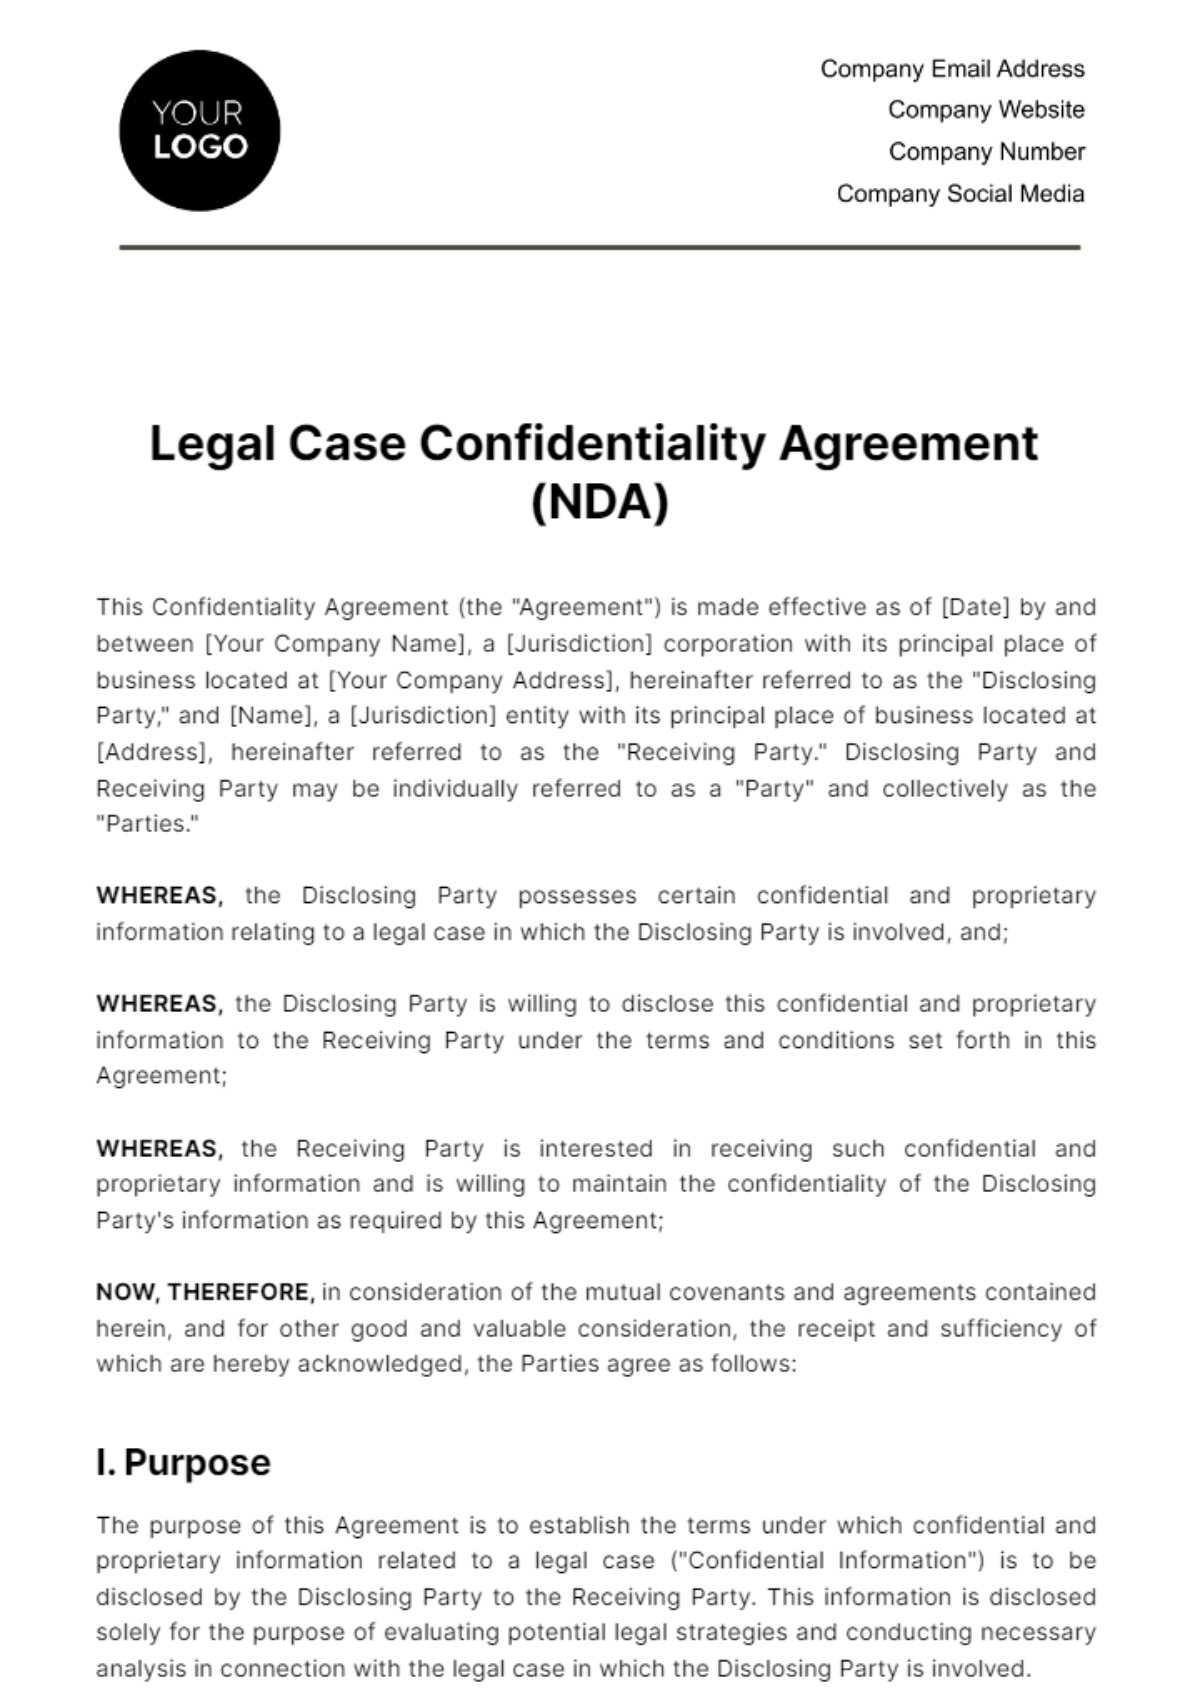 Free Legal Case Confidentiality Agreement (NDA) Template